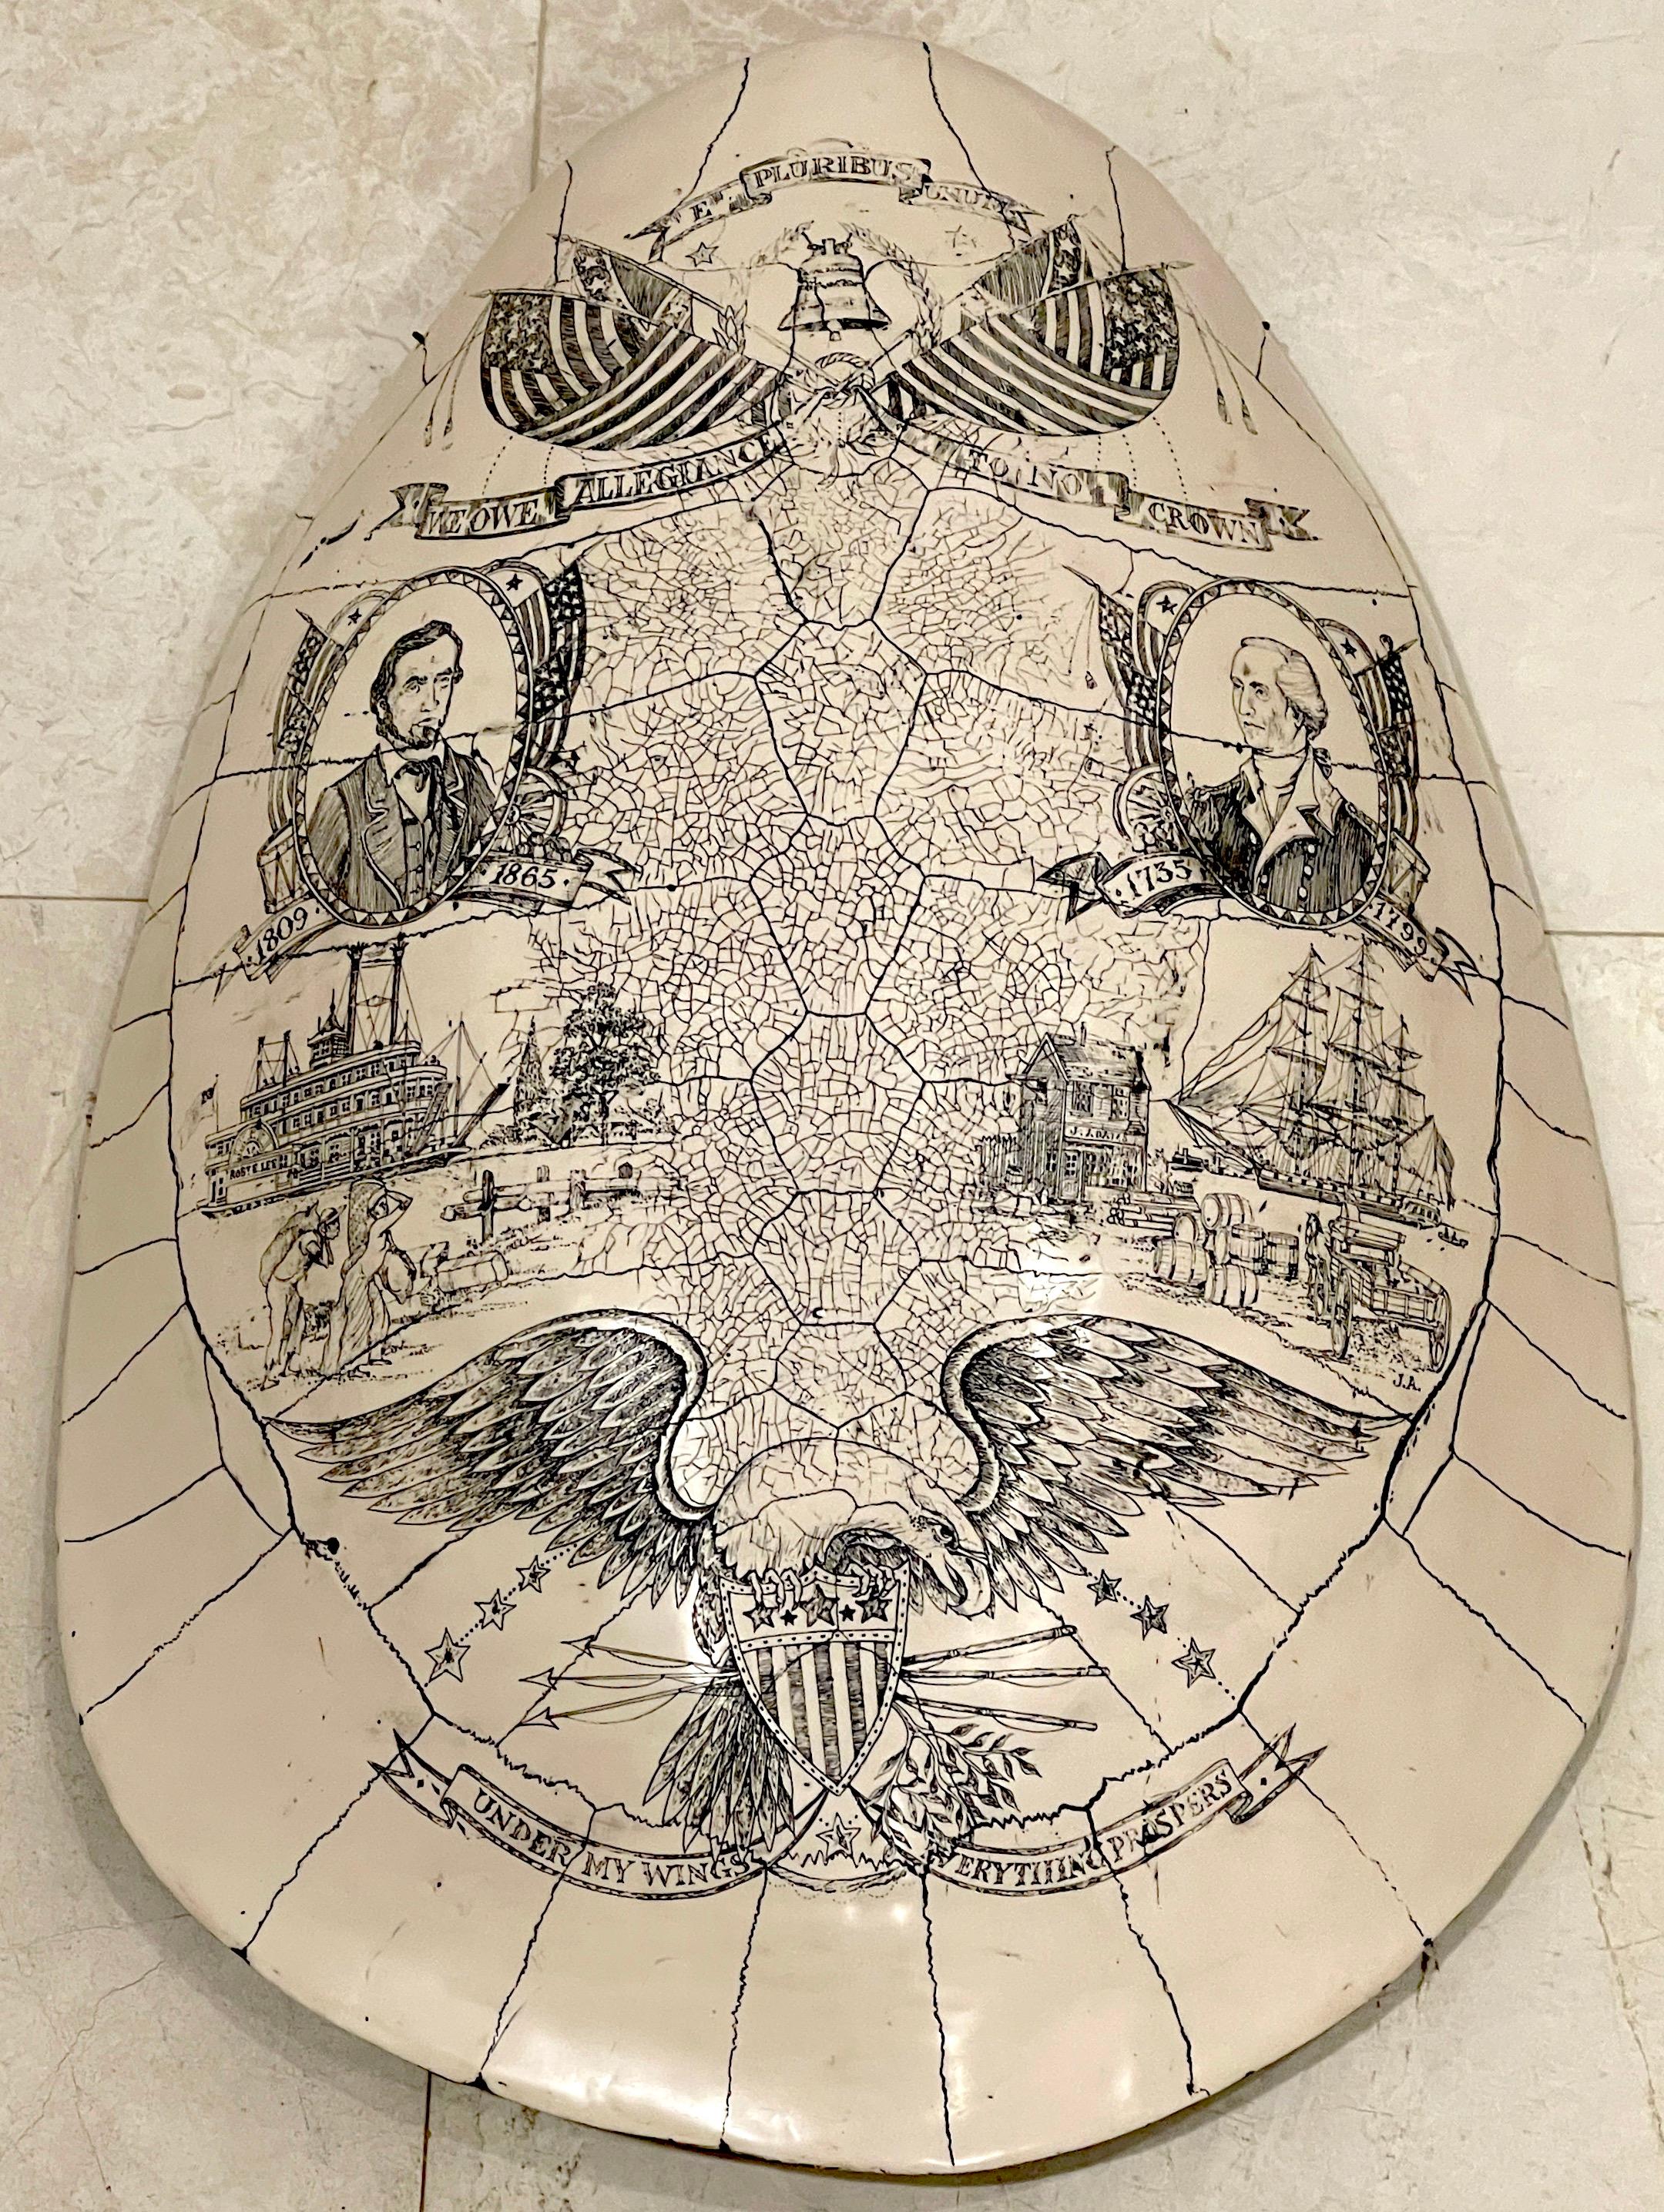 Faux Albino Sea Turtle Shell Scrimshaw with American Historical Vignettes 
Circa 1980s, Simulated Tortoiseshell  

The faux albino sea turtle shell scrimshaw sculpture is a unique and visually striking piece, created in the later 20th century to